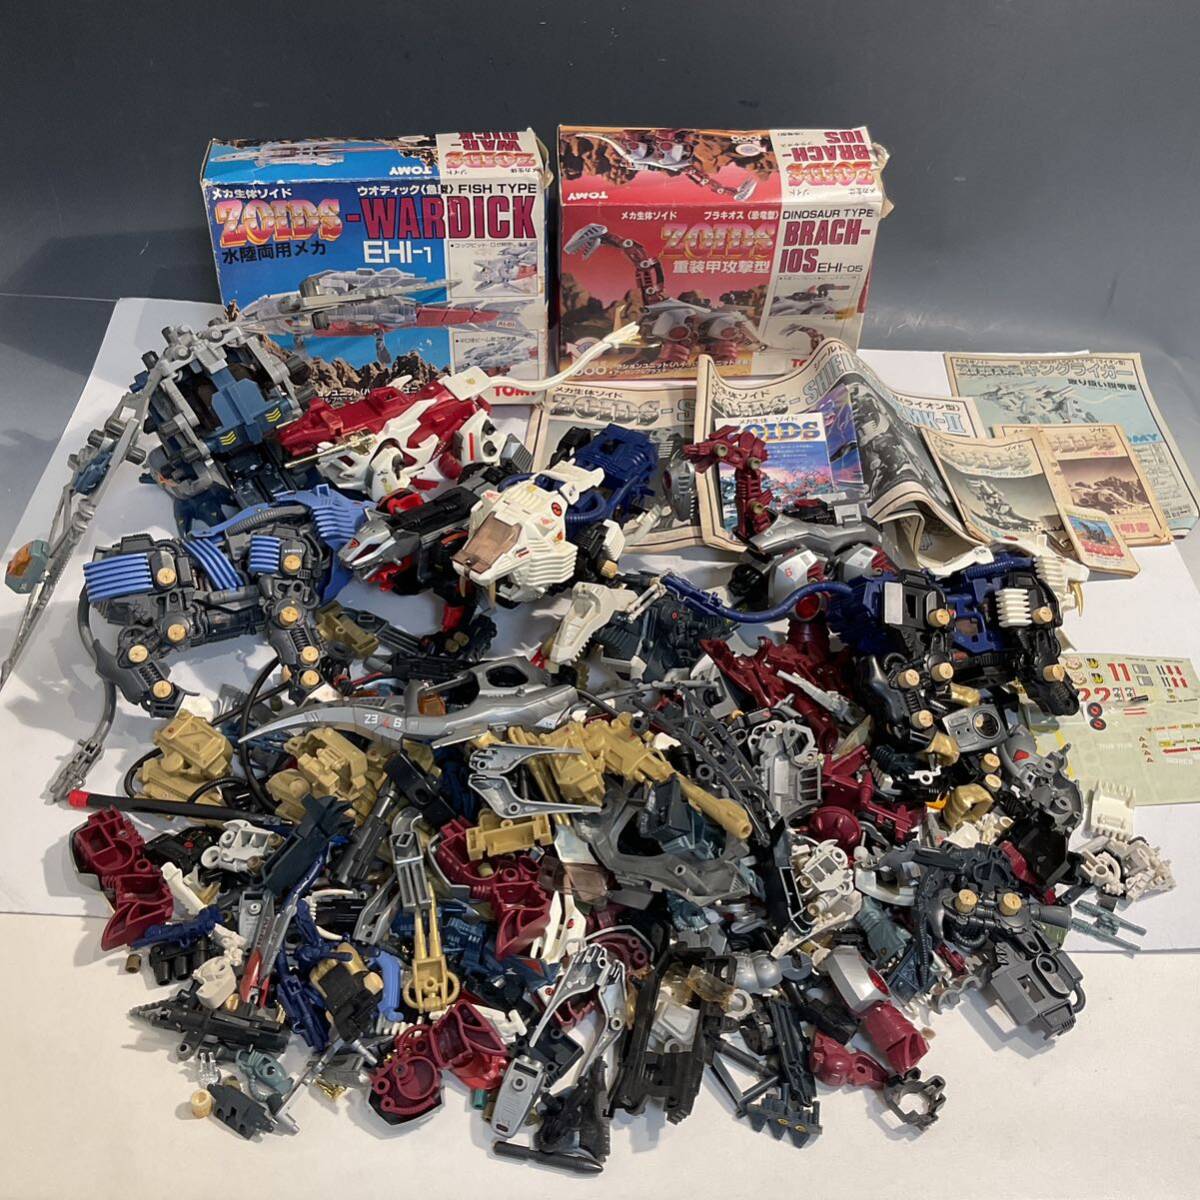 4032202 Zoids ZOIDS Tommy TOMY parts large amount together junk empty box manual parts taking . that time thing toy plastic model 